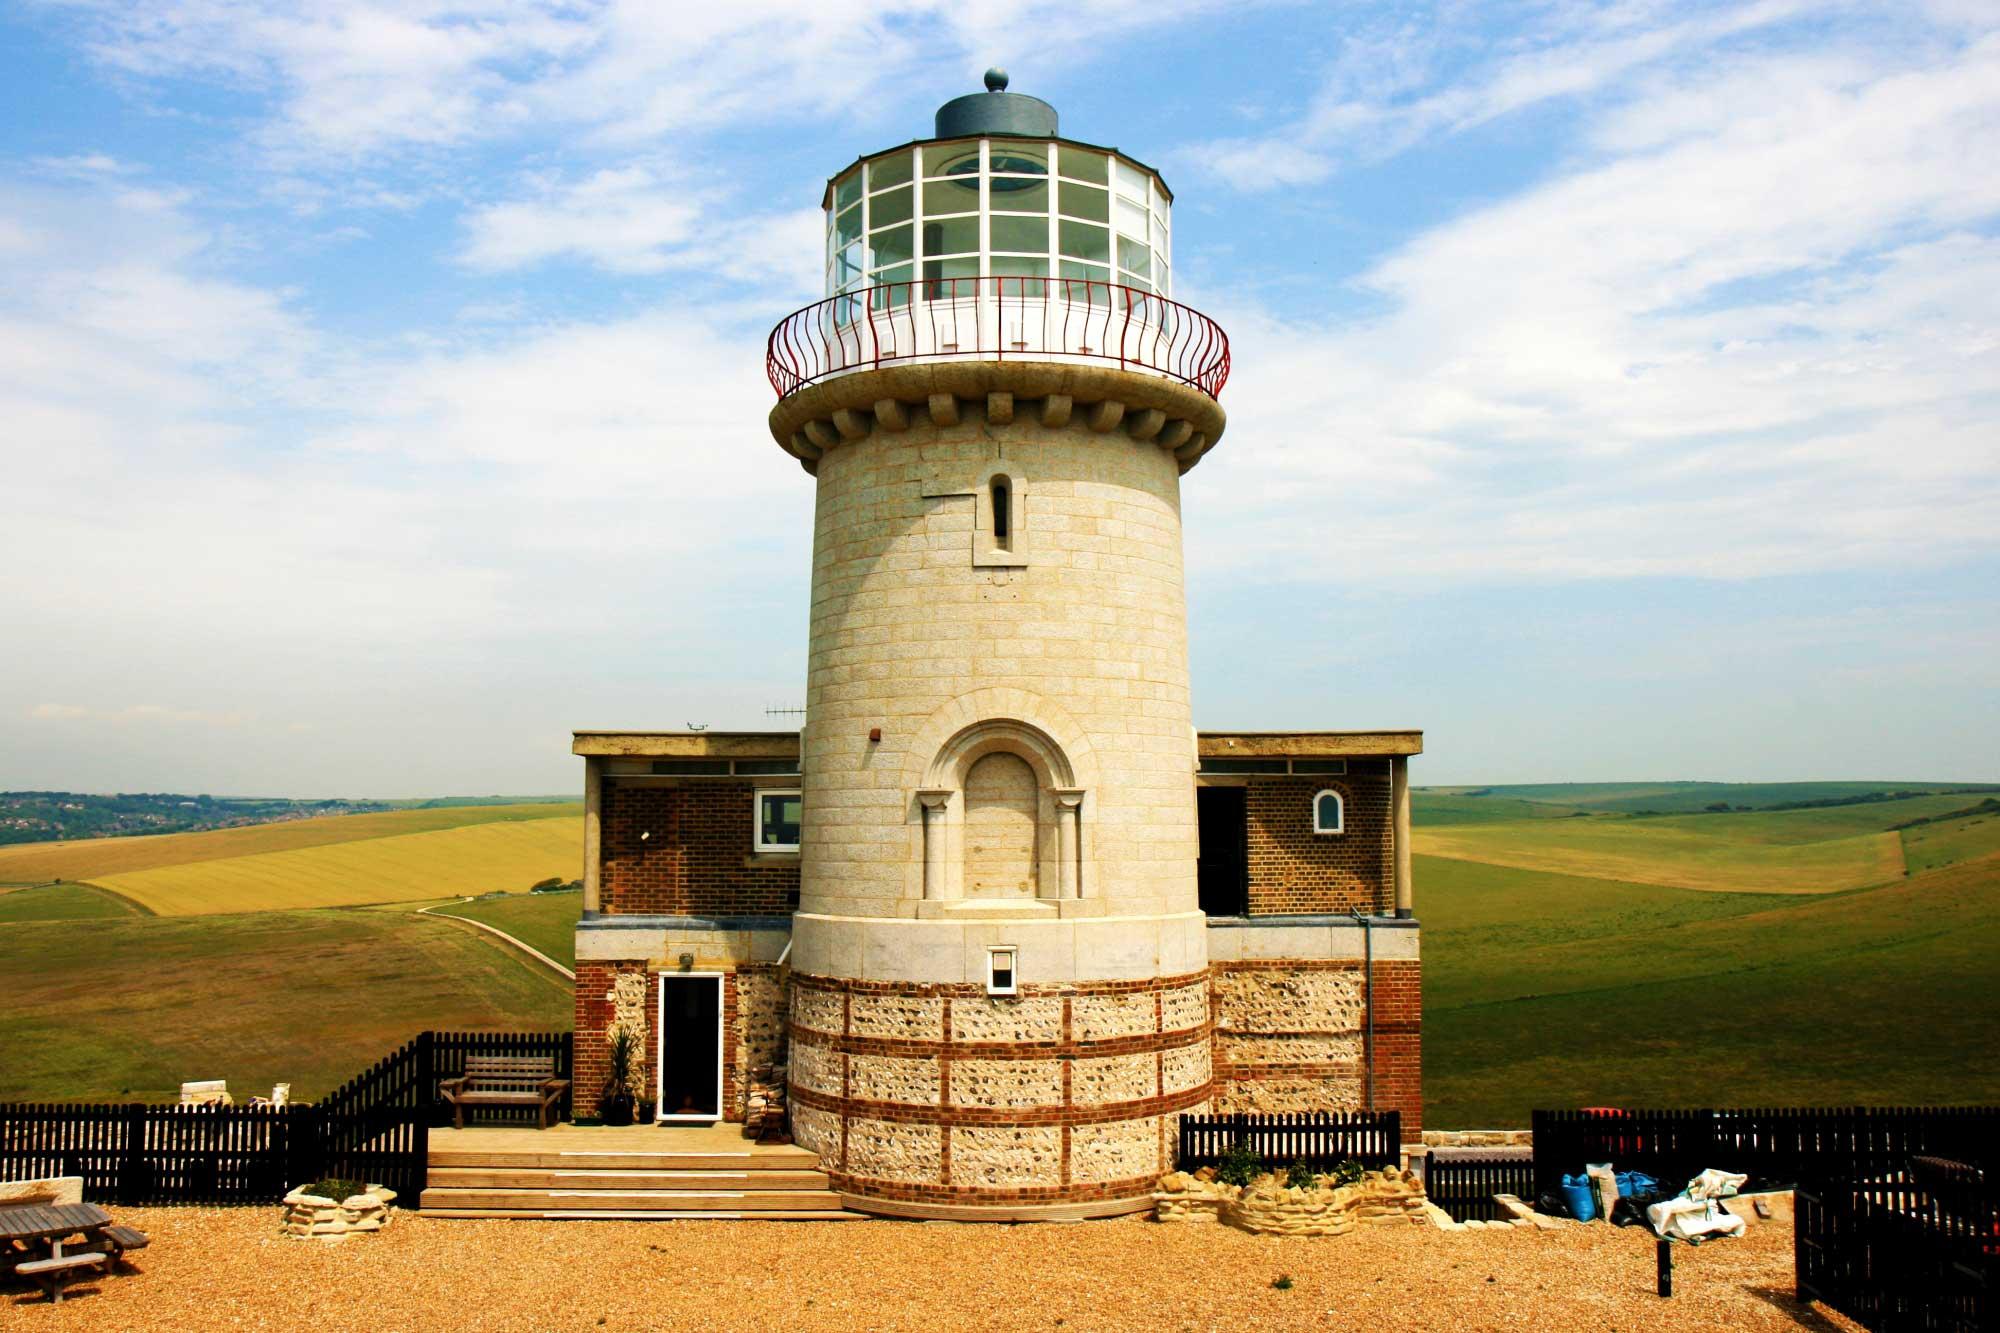 Belle Tout Lighthouse, equipped to spy on passing ships